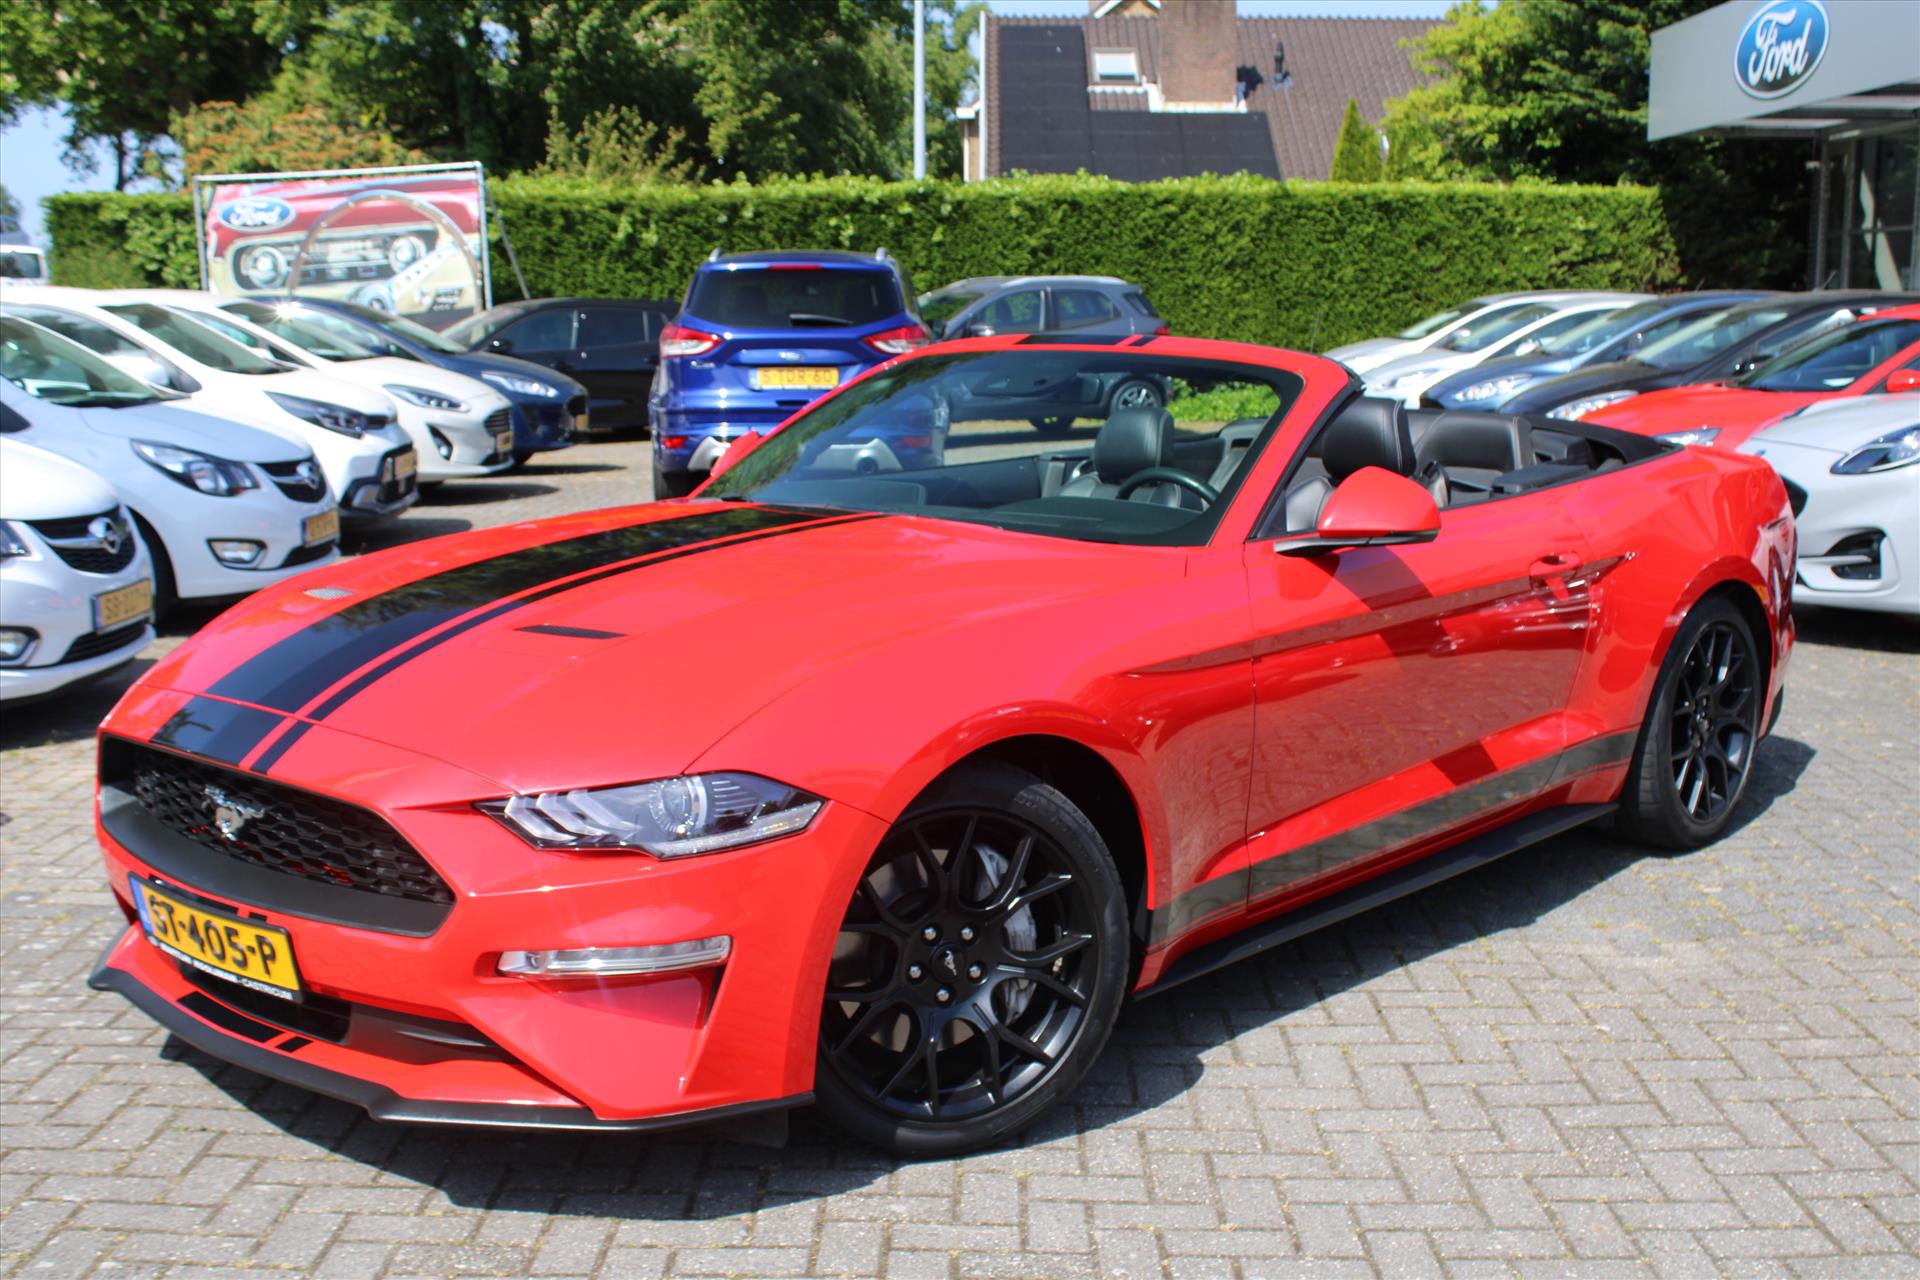 Ford Mustang Convertible 2.3 EcoBoost M6 290pk/213kw bij viaBOVAG.nl